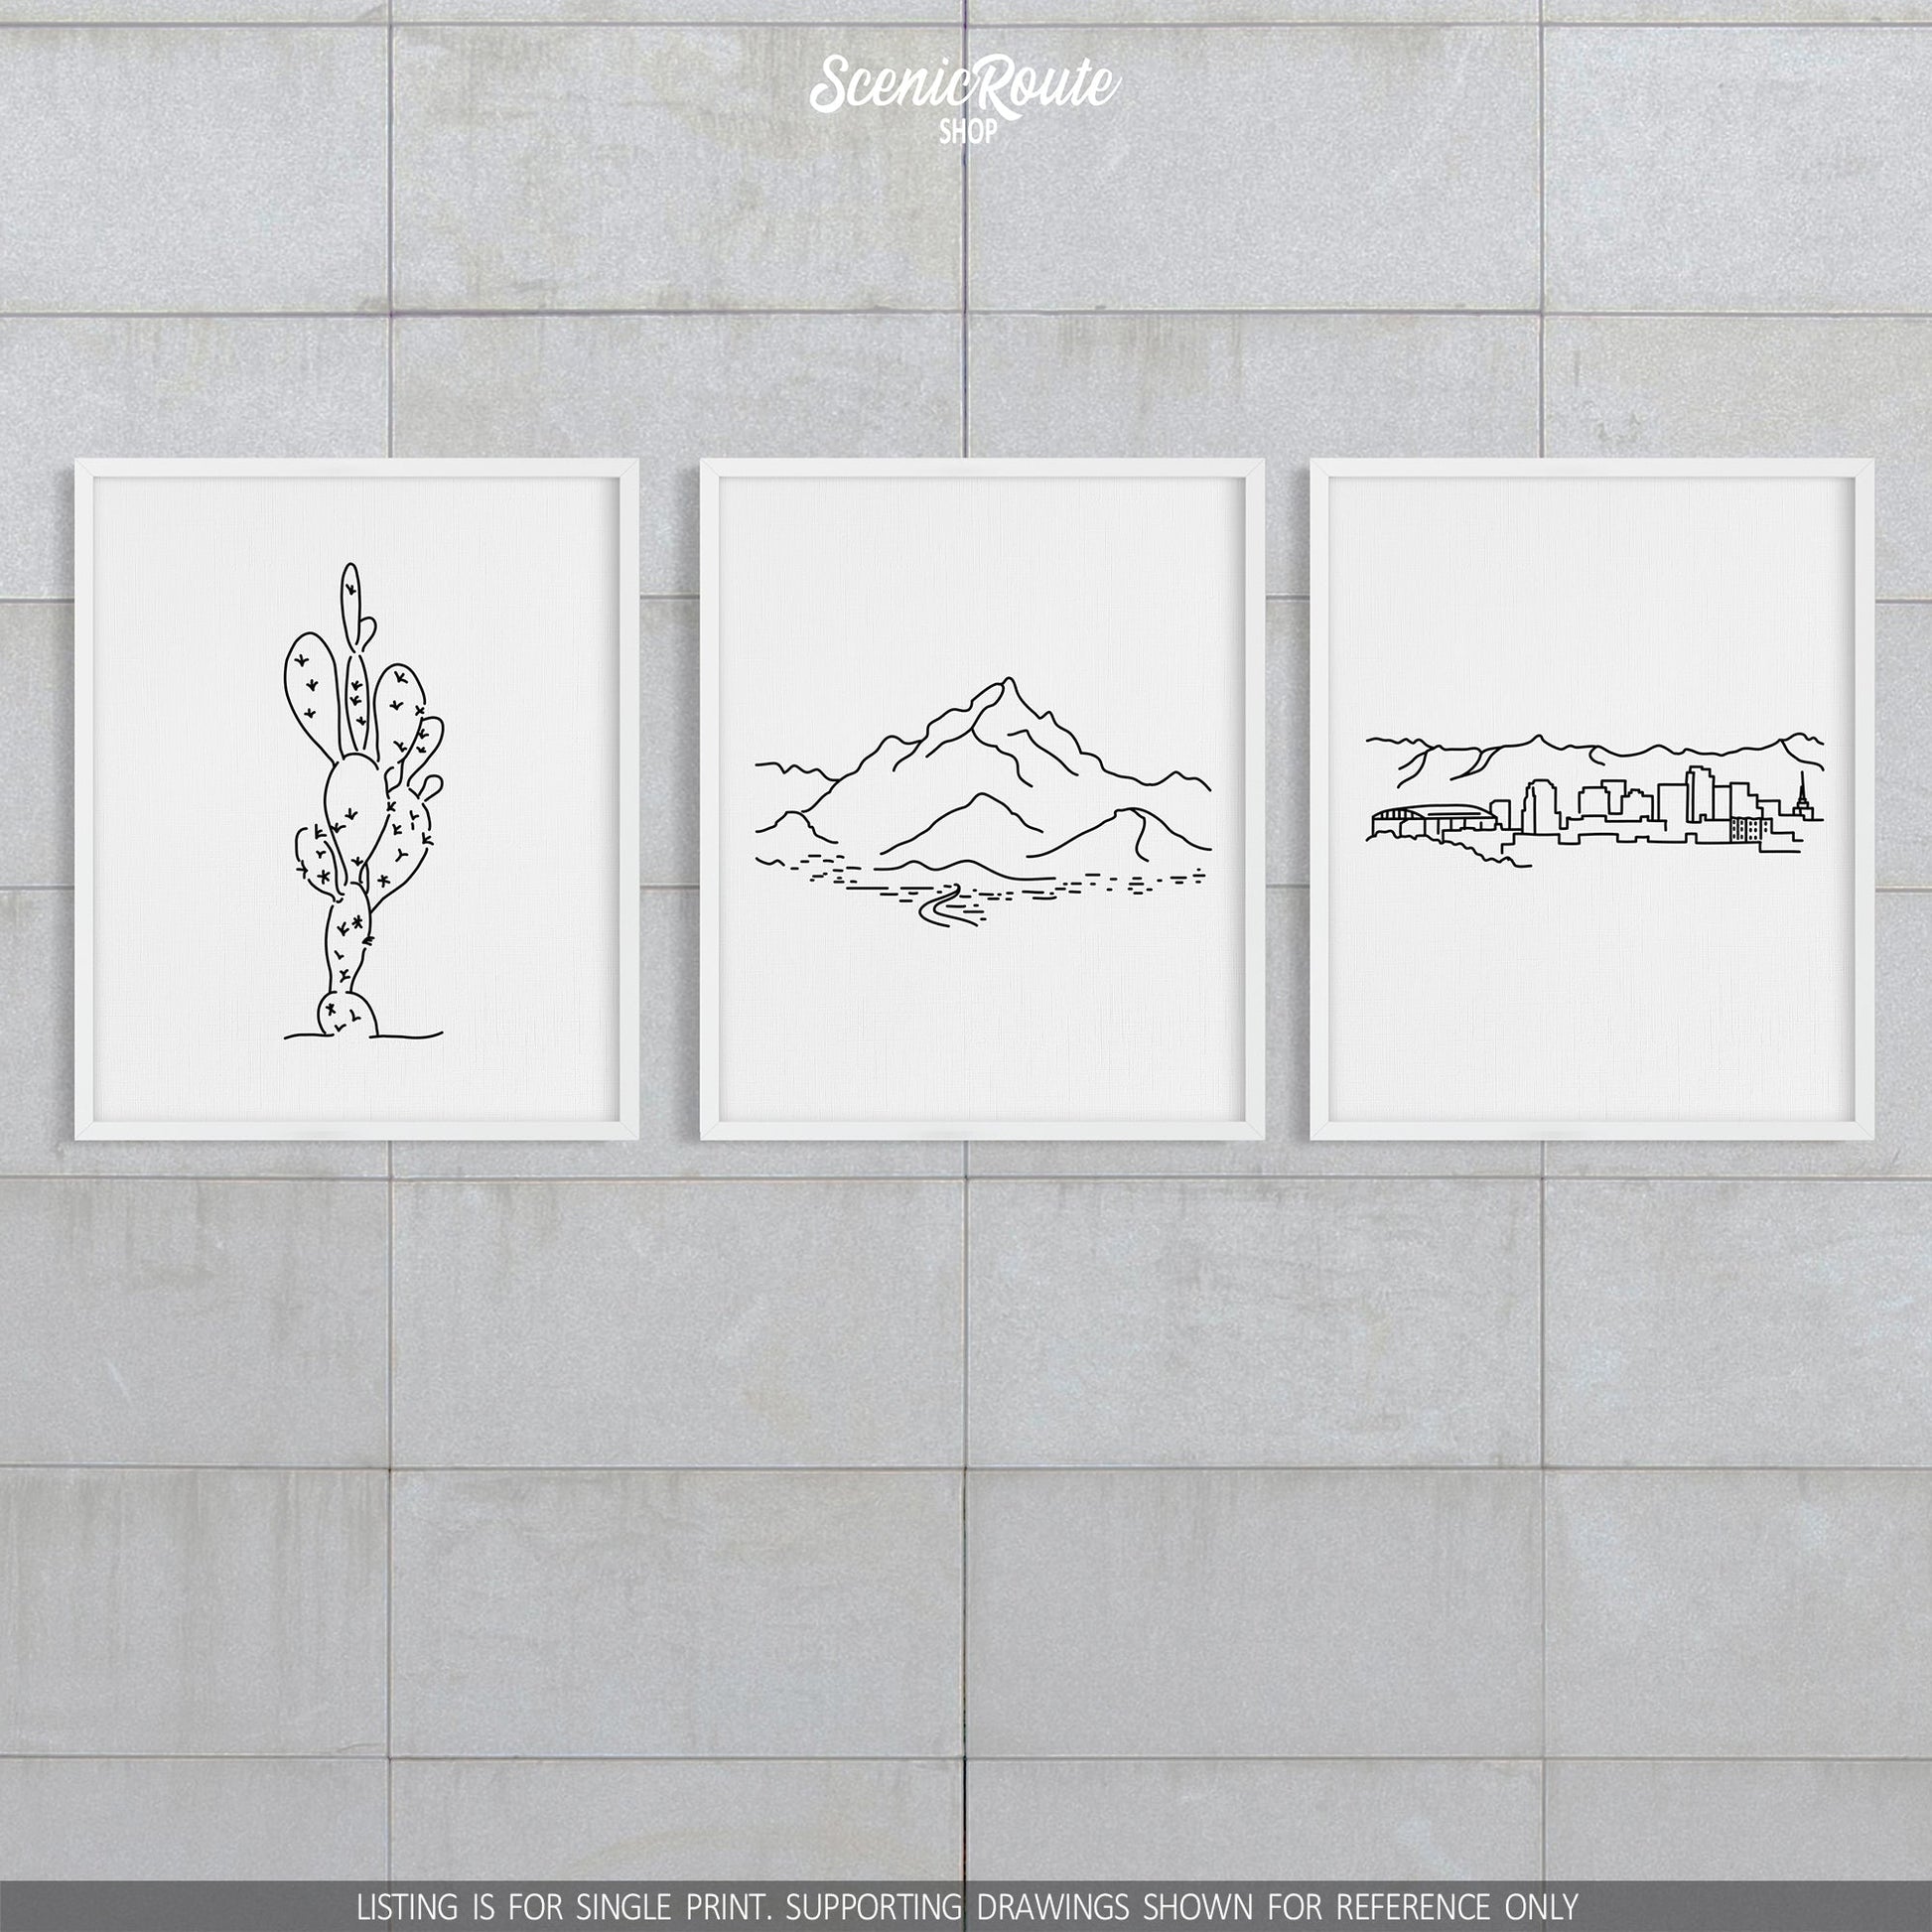 A group of three framed drawings on a block wall. The line art drawings include a Prickly Pear Cactus, Piestewa Peak, and the Phoenix Skyline